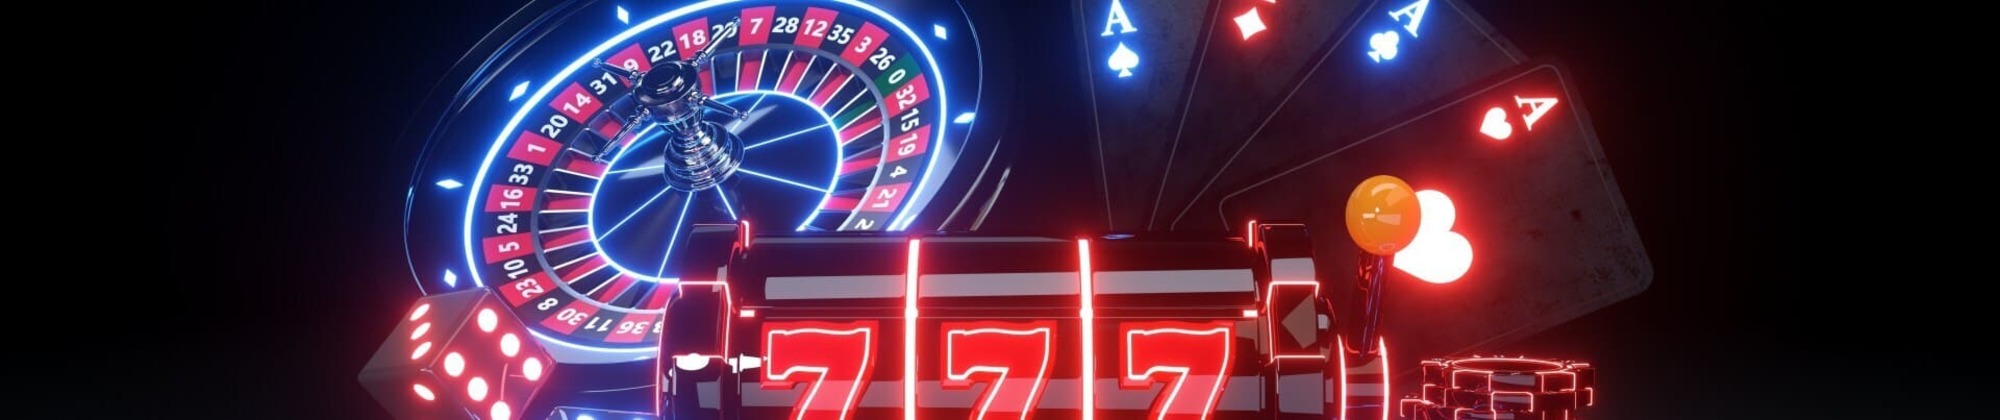 THE PROS AND CONS OF ONLINE CASINO BONUSES